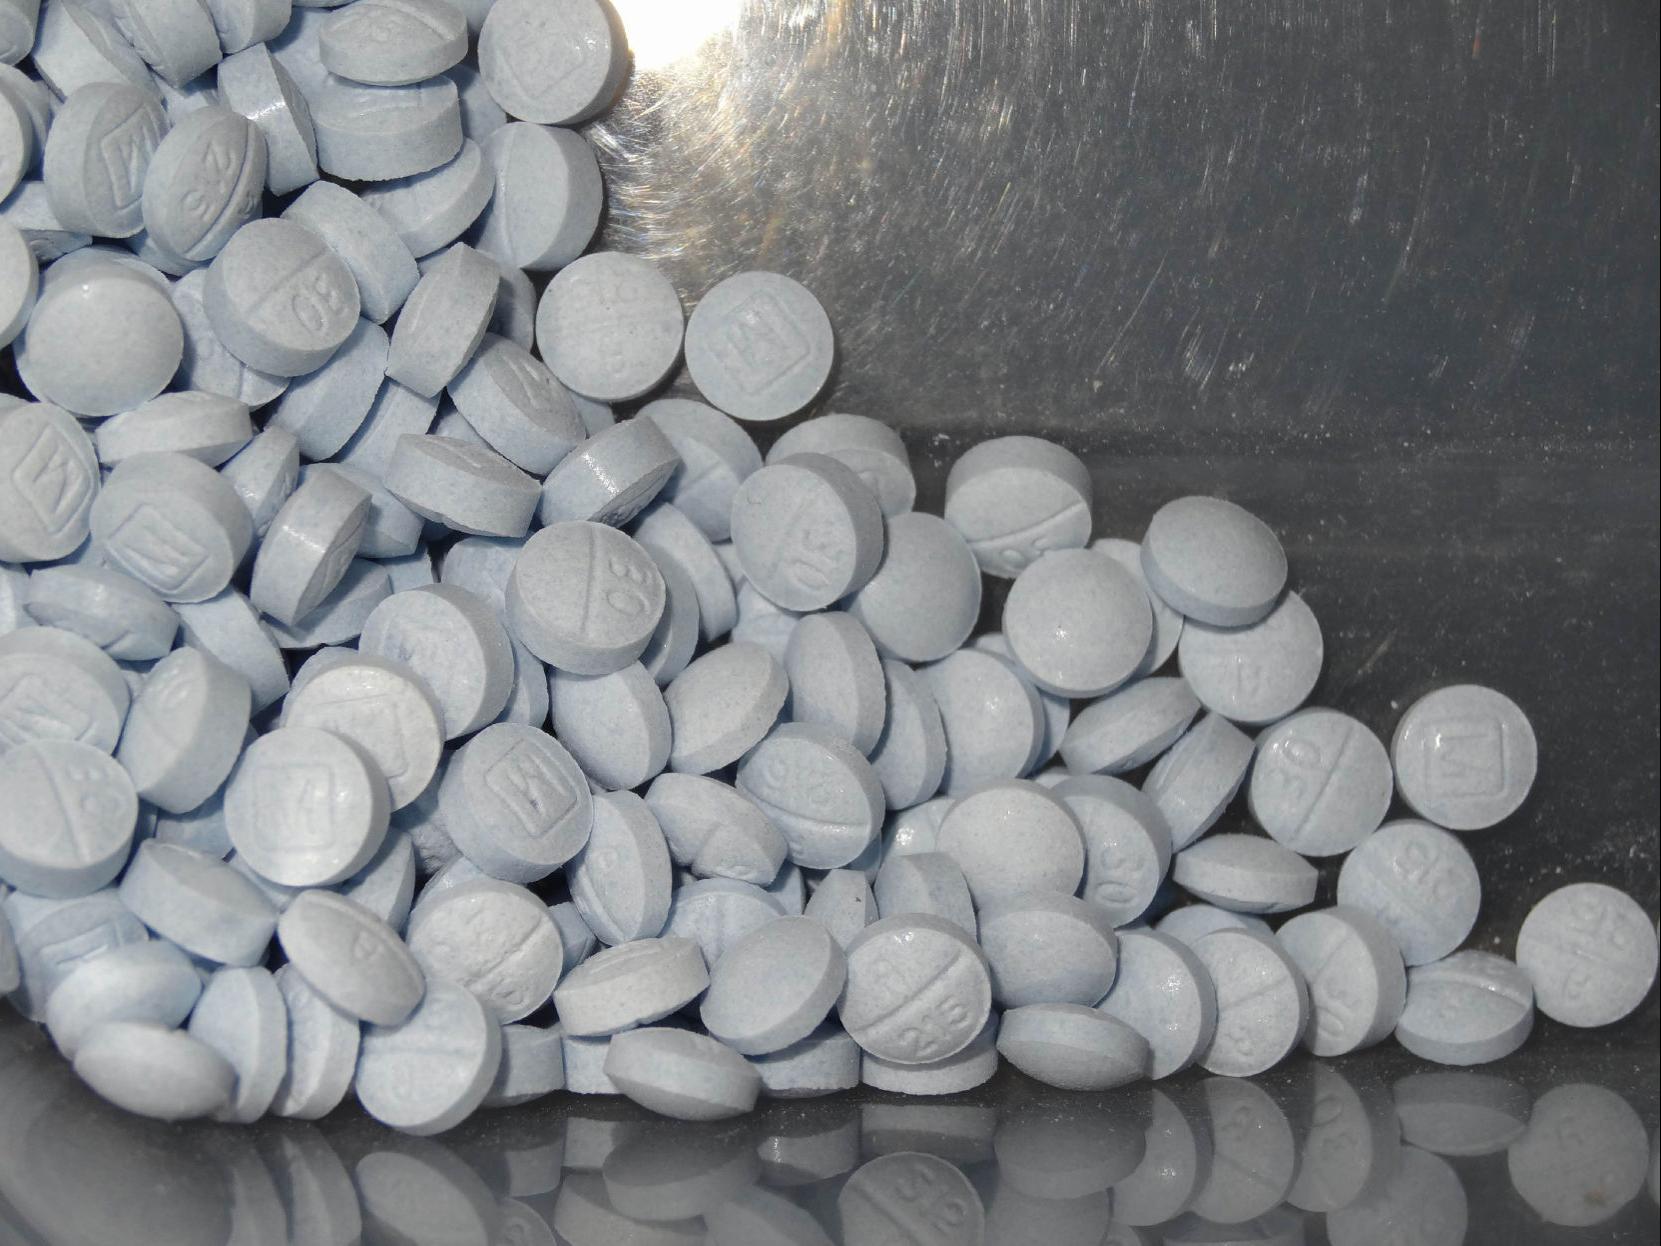 Deadly blue 'Mexican oxy' pills take toll on US Southwest